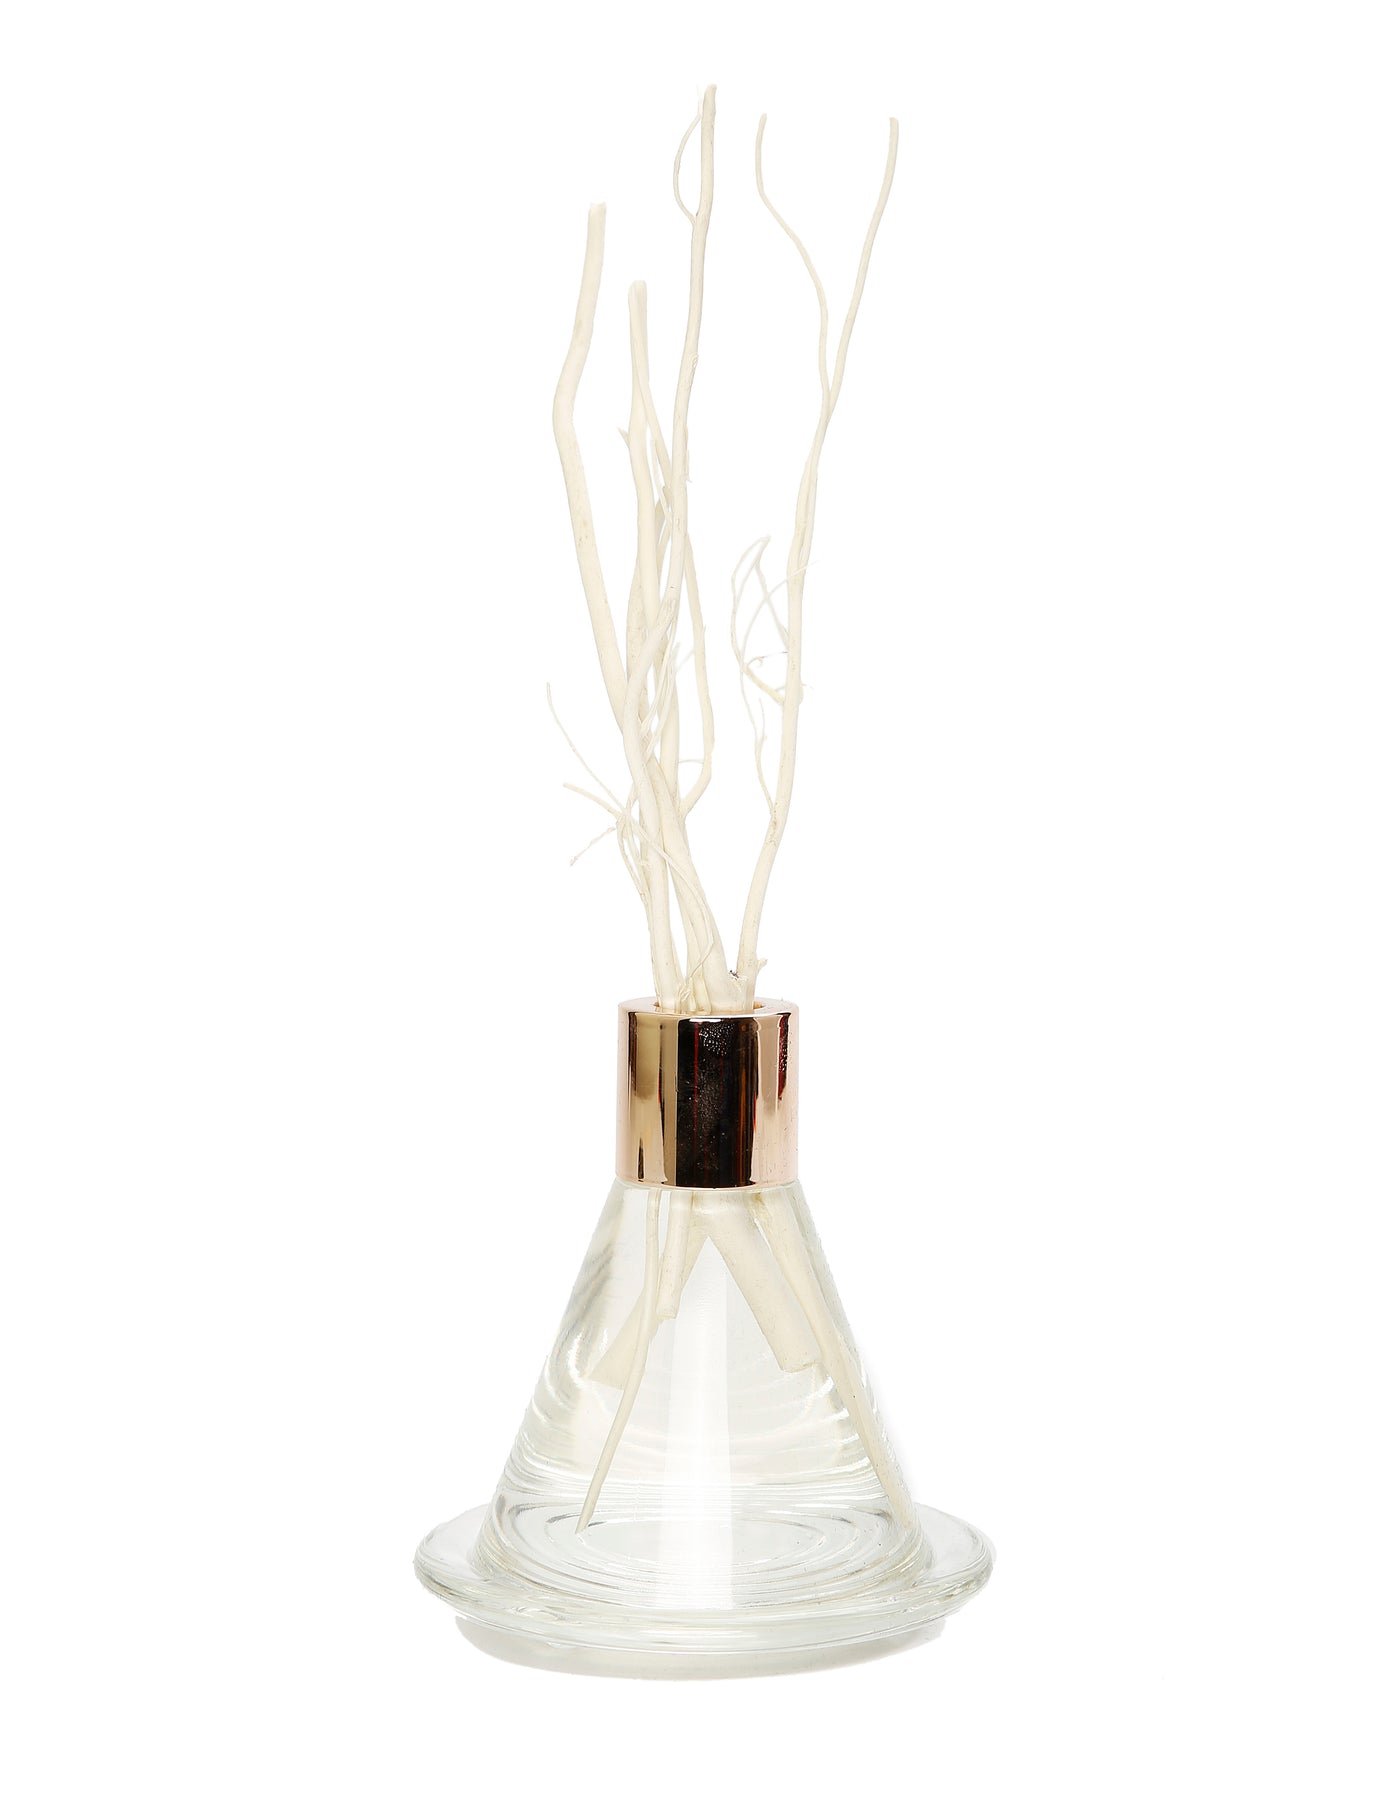 Clear Cone Shaped Reed Diffuser with Tray, "Zen Tea" Scent